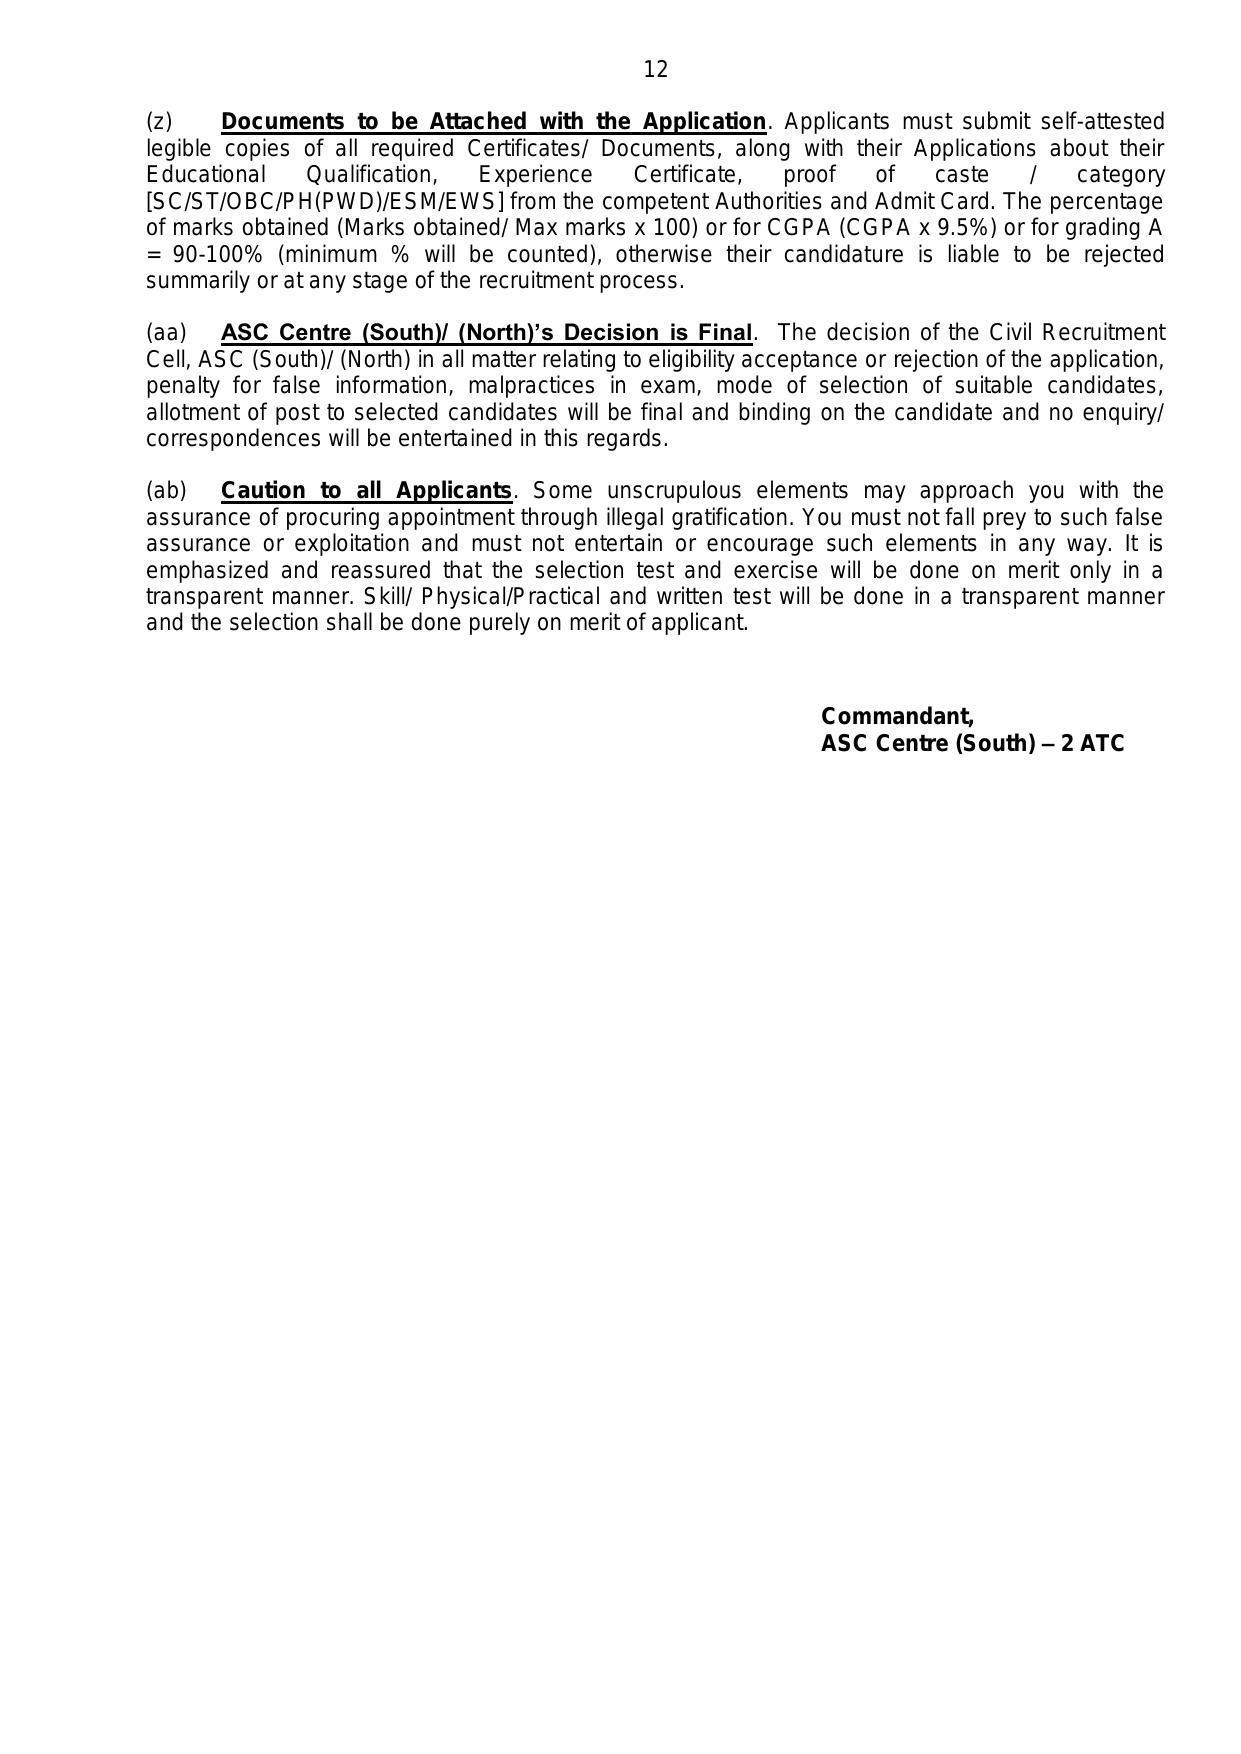 ASC CENTRE (SOUTH) - 2ATC (Indian Army) MTS, Cook and Various Vacancy Recruitment 2022 - Page 11